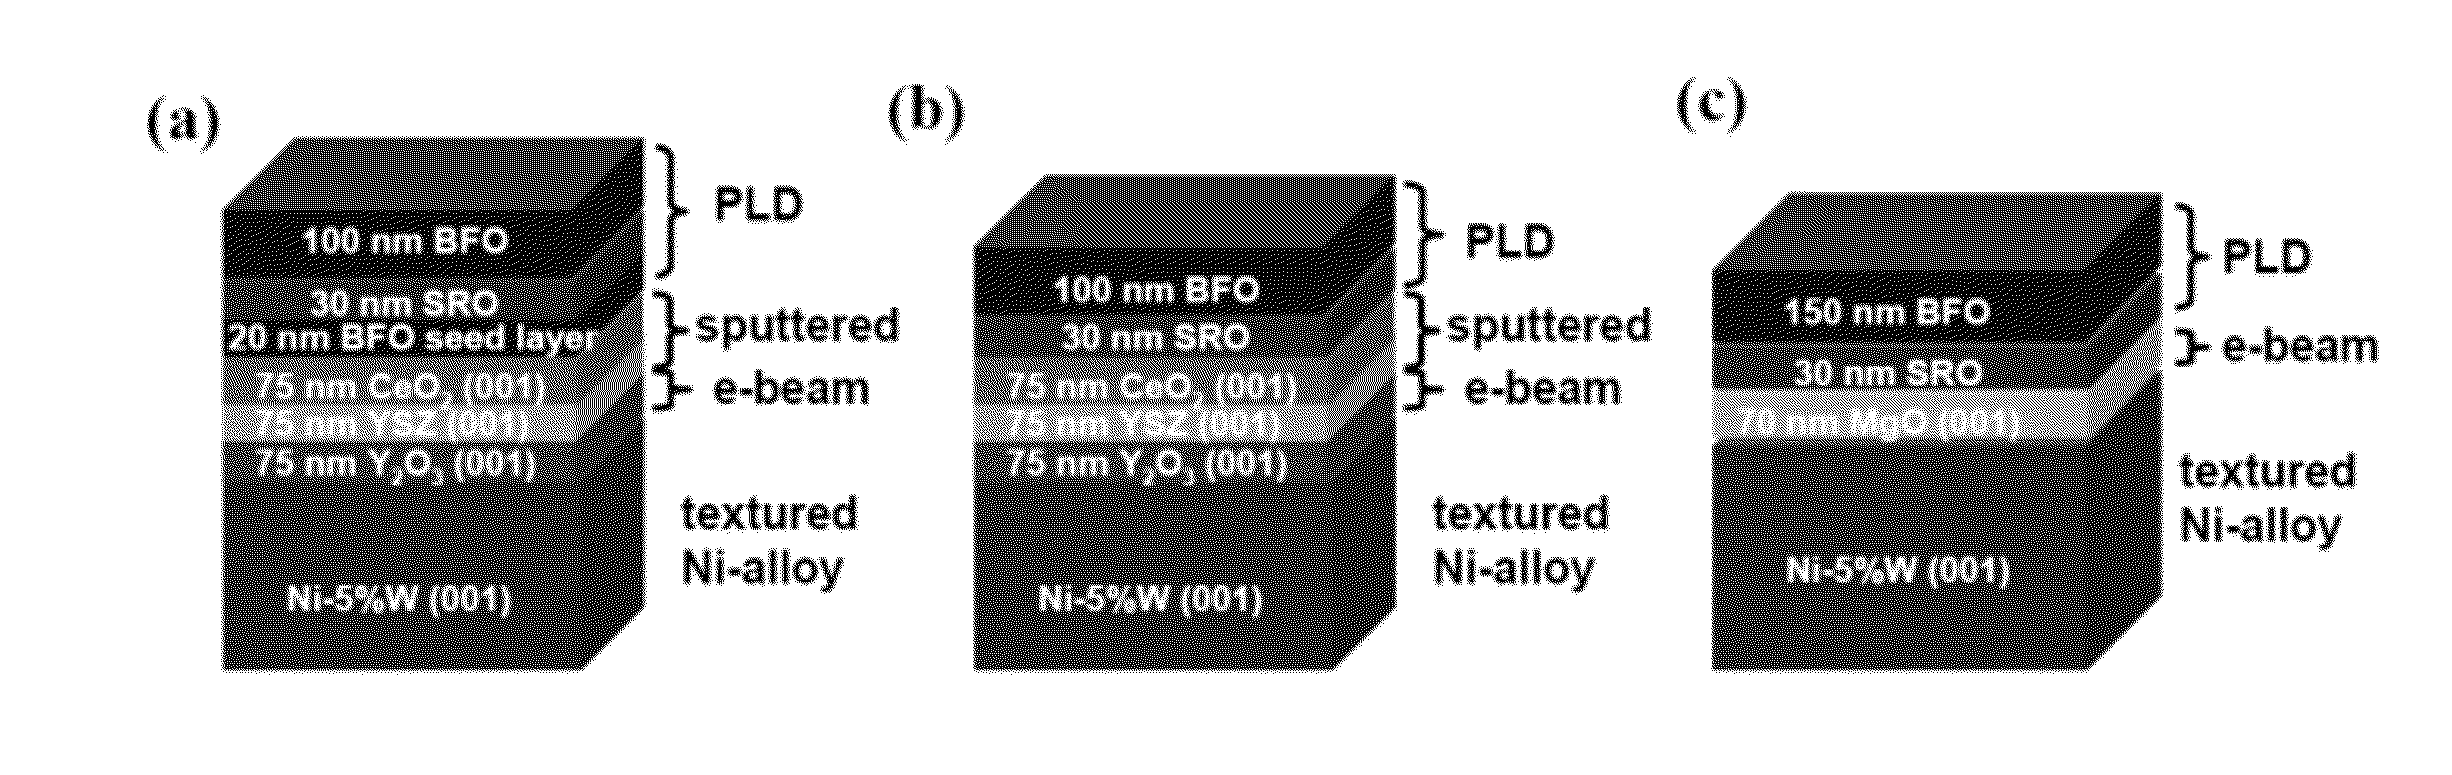 Polycrystalline ferroelectric or multiferroic oxide articles on biaxially textured substrates and methods for making same